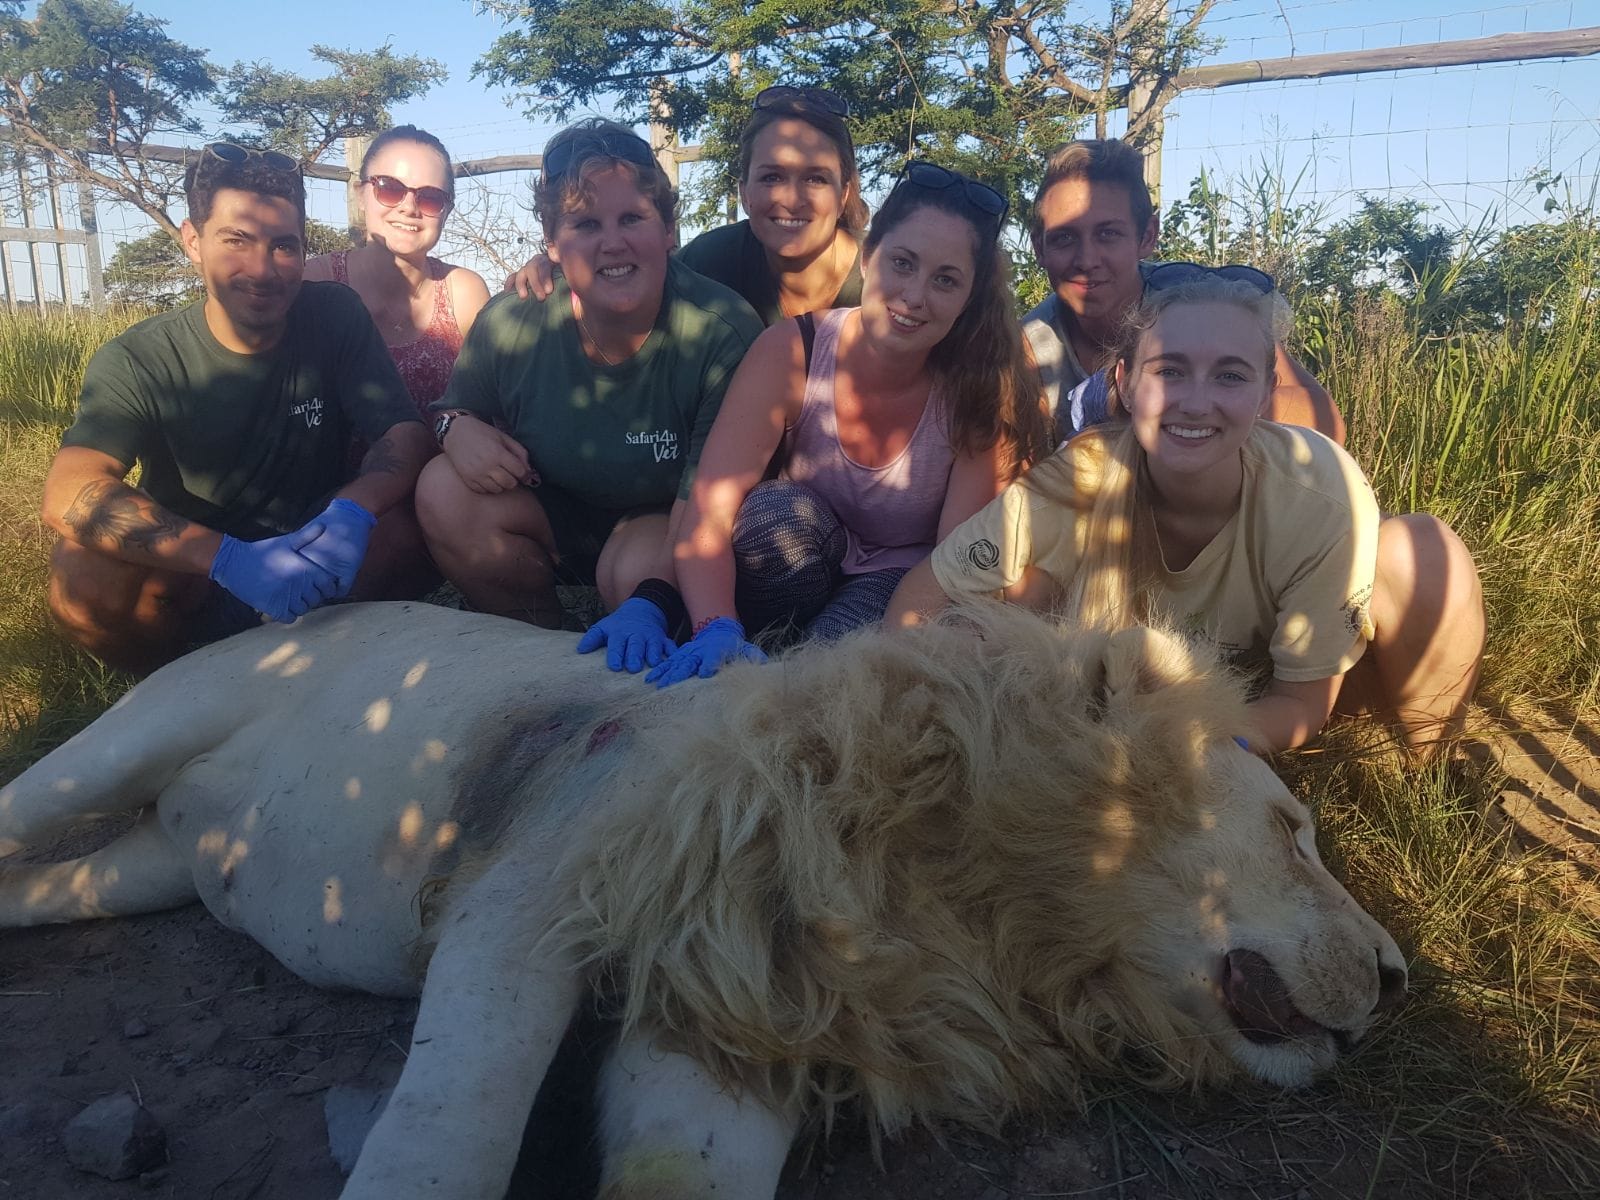 group of people helping a lion which is asleep on the ground in front of them